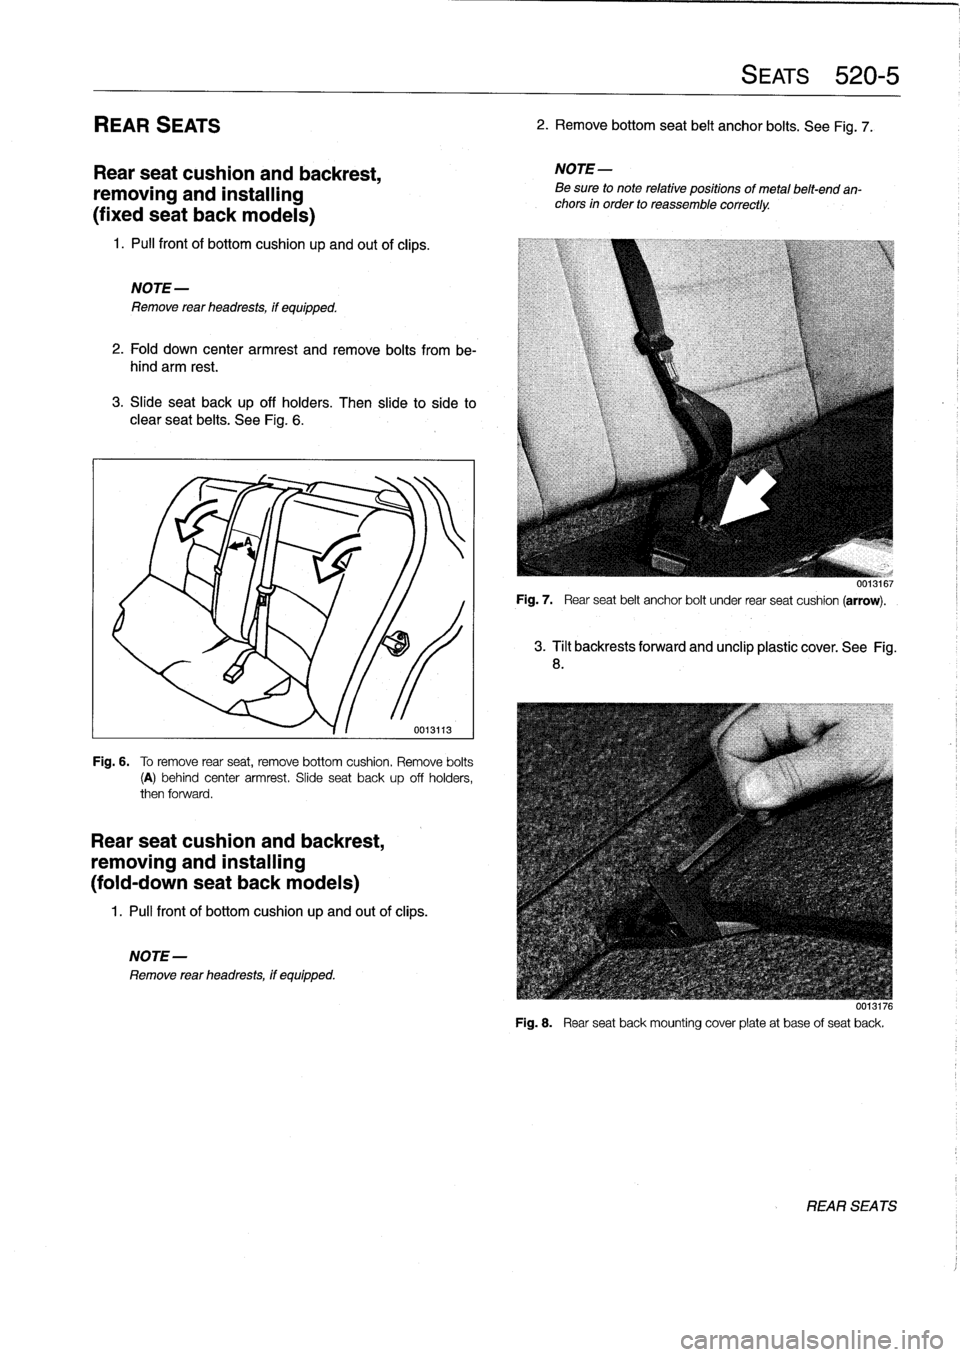 BMW 318i 1996 E36 Workshop Manual 
REAR
SEATS

Rear
seat
cushion
and
backrest,

removing
and
installing

(fixed
seat
back
modeis)

1
.
Pull
front
of
bottomcushion
up
and
out
of
clips
.

NOTE-

Remove
rear
headrests,
if
equipped
.

2
.